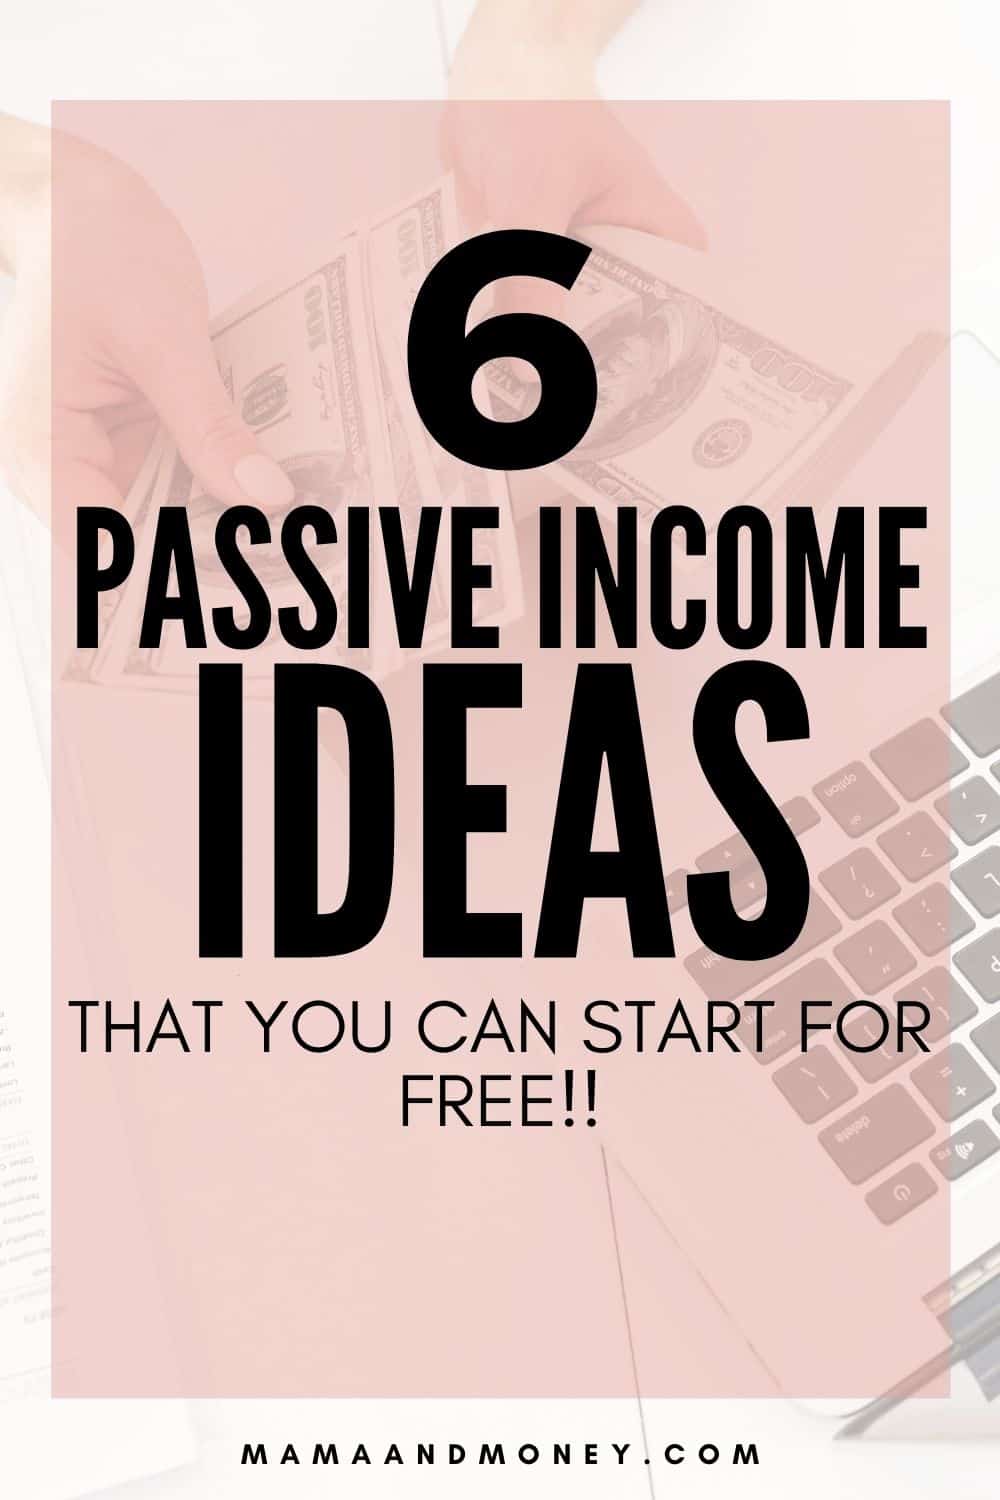 6 Passive Income Ideas That You Can Start for Free